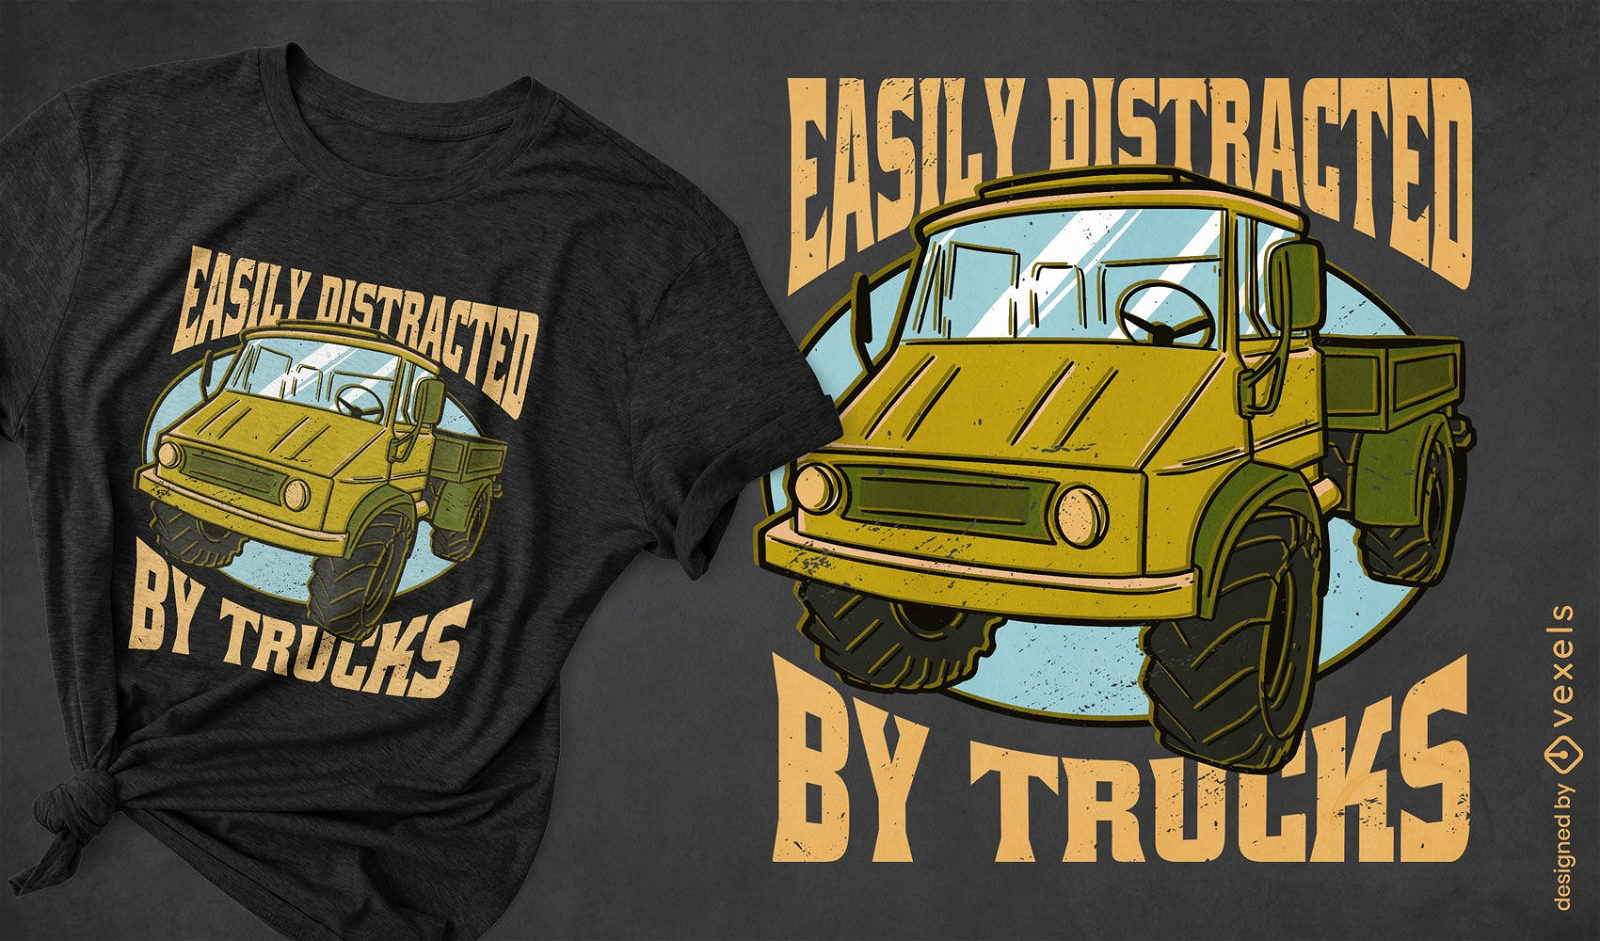 Distracted by trucks quote t-shirt design